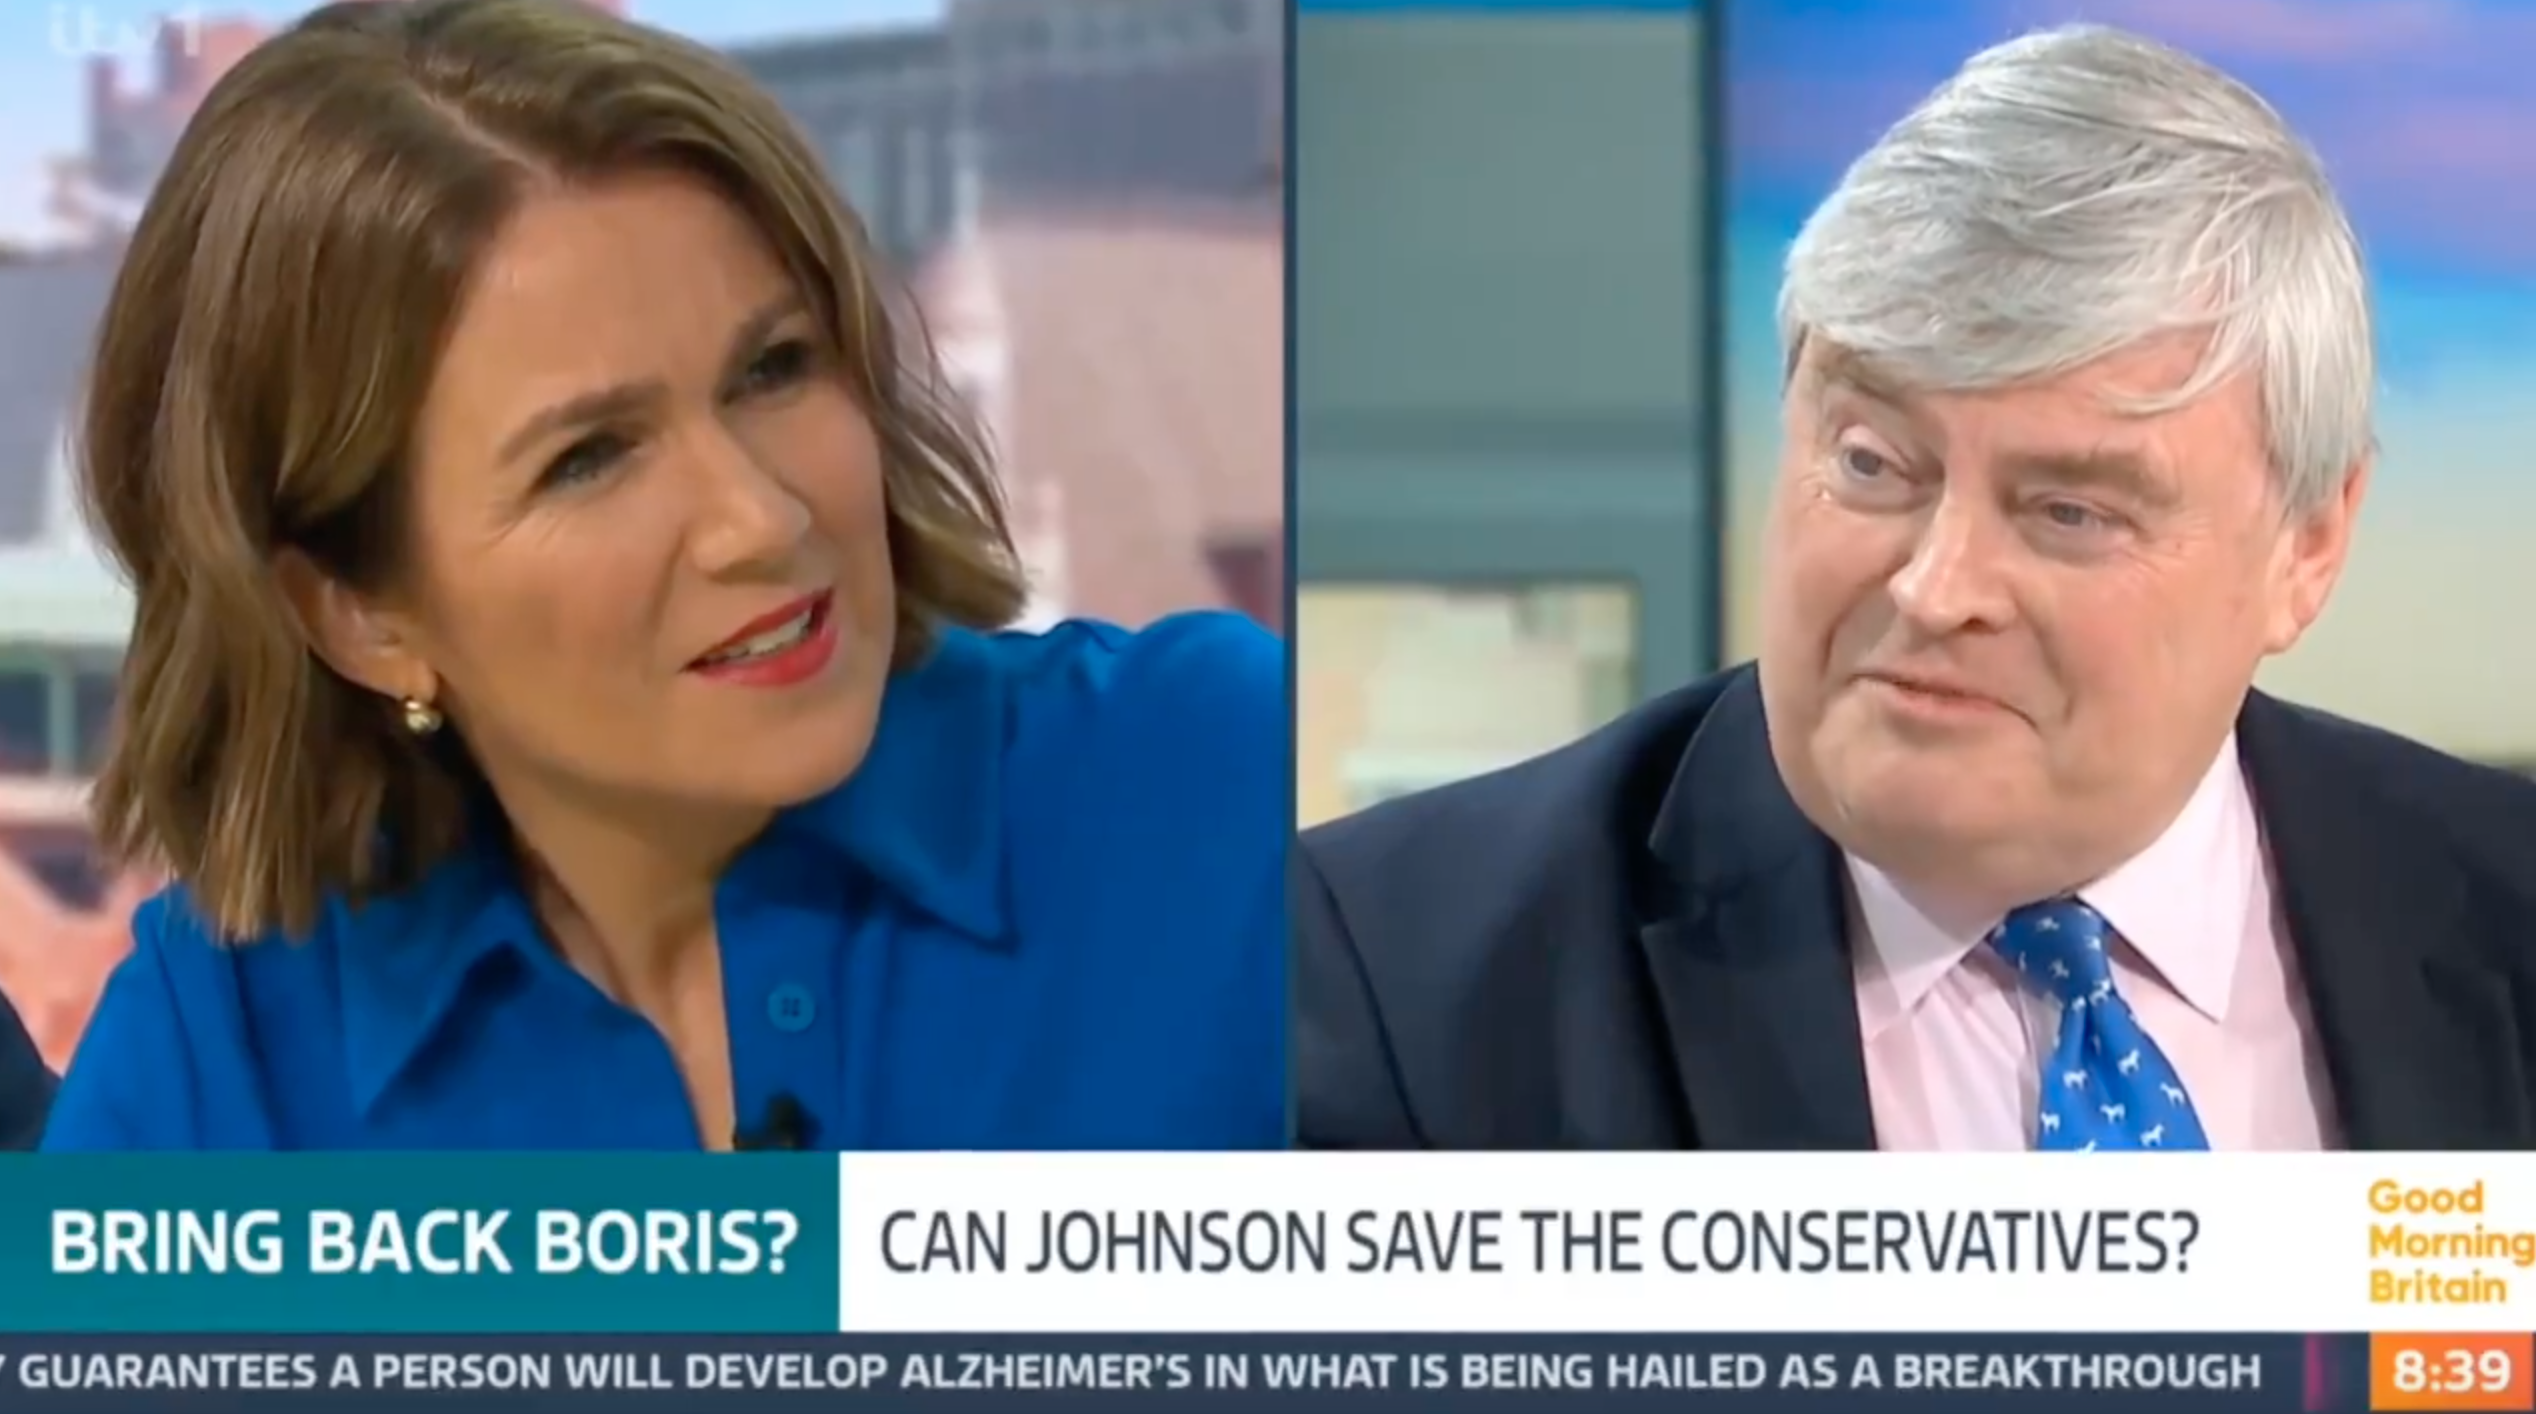 David Bannerman Calls For Boris Johnson To Be Made Tory Chair, Suggests Ex-PM ‘Set Up’ By Media...